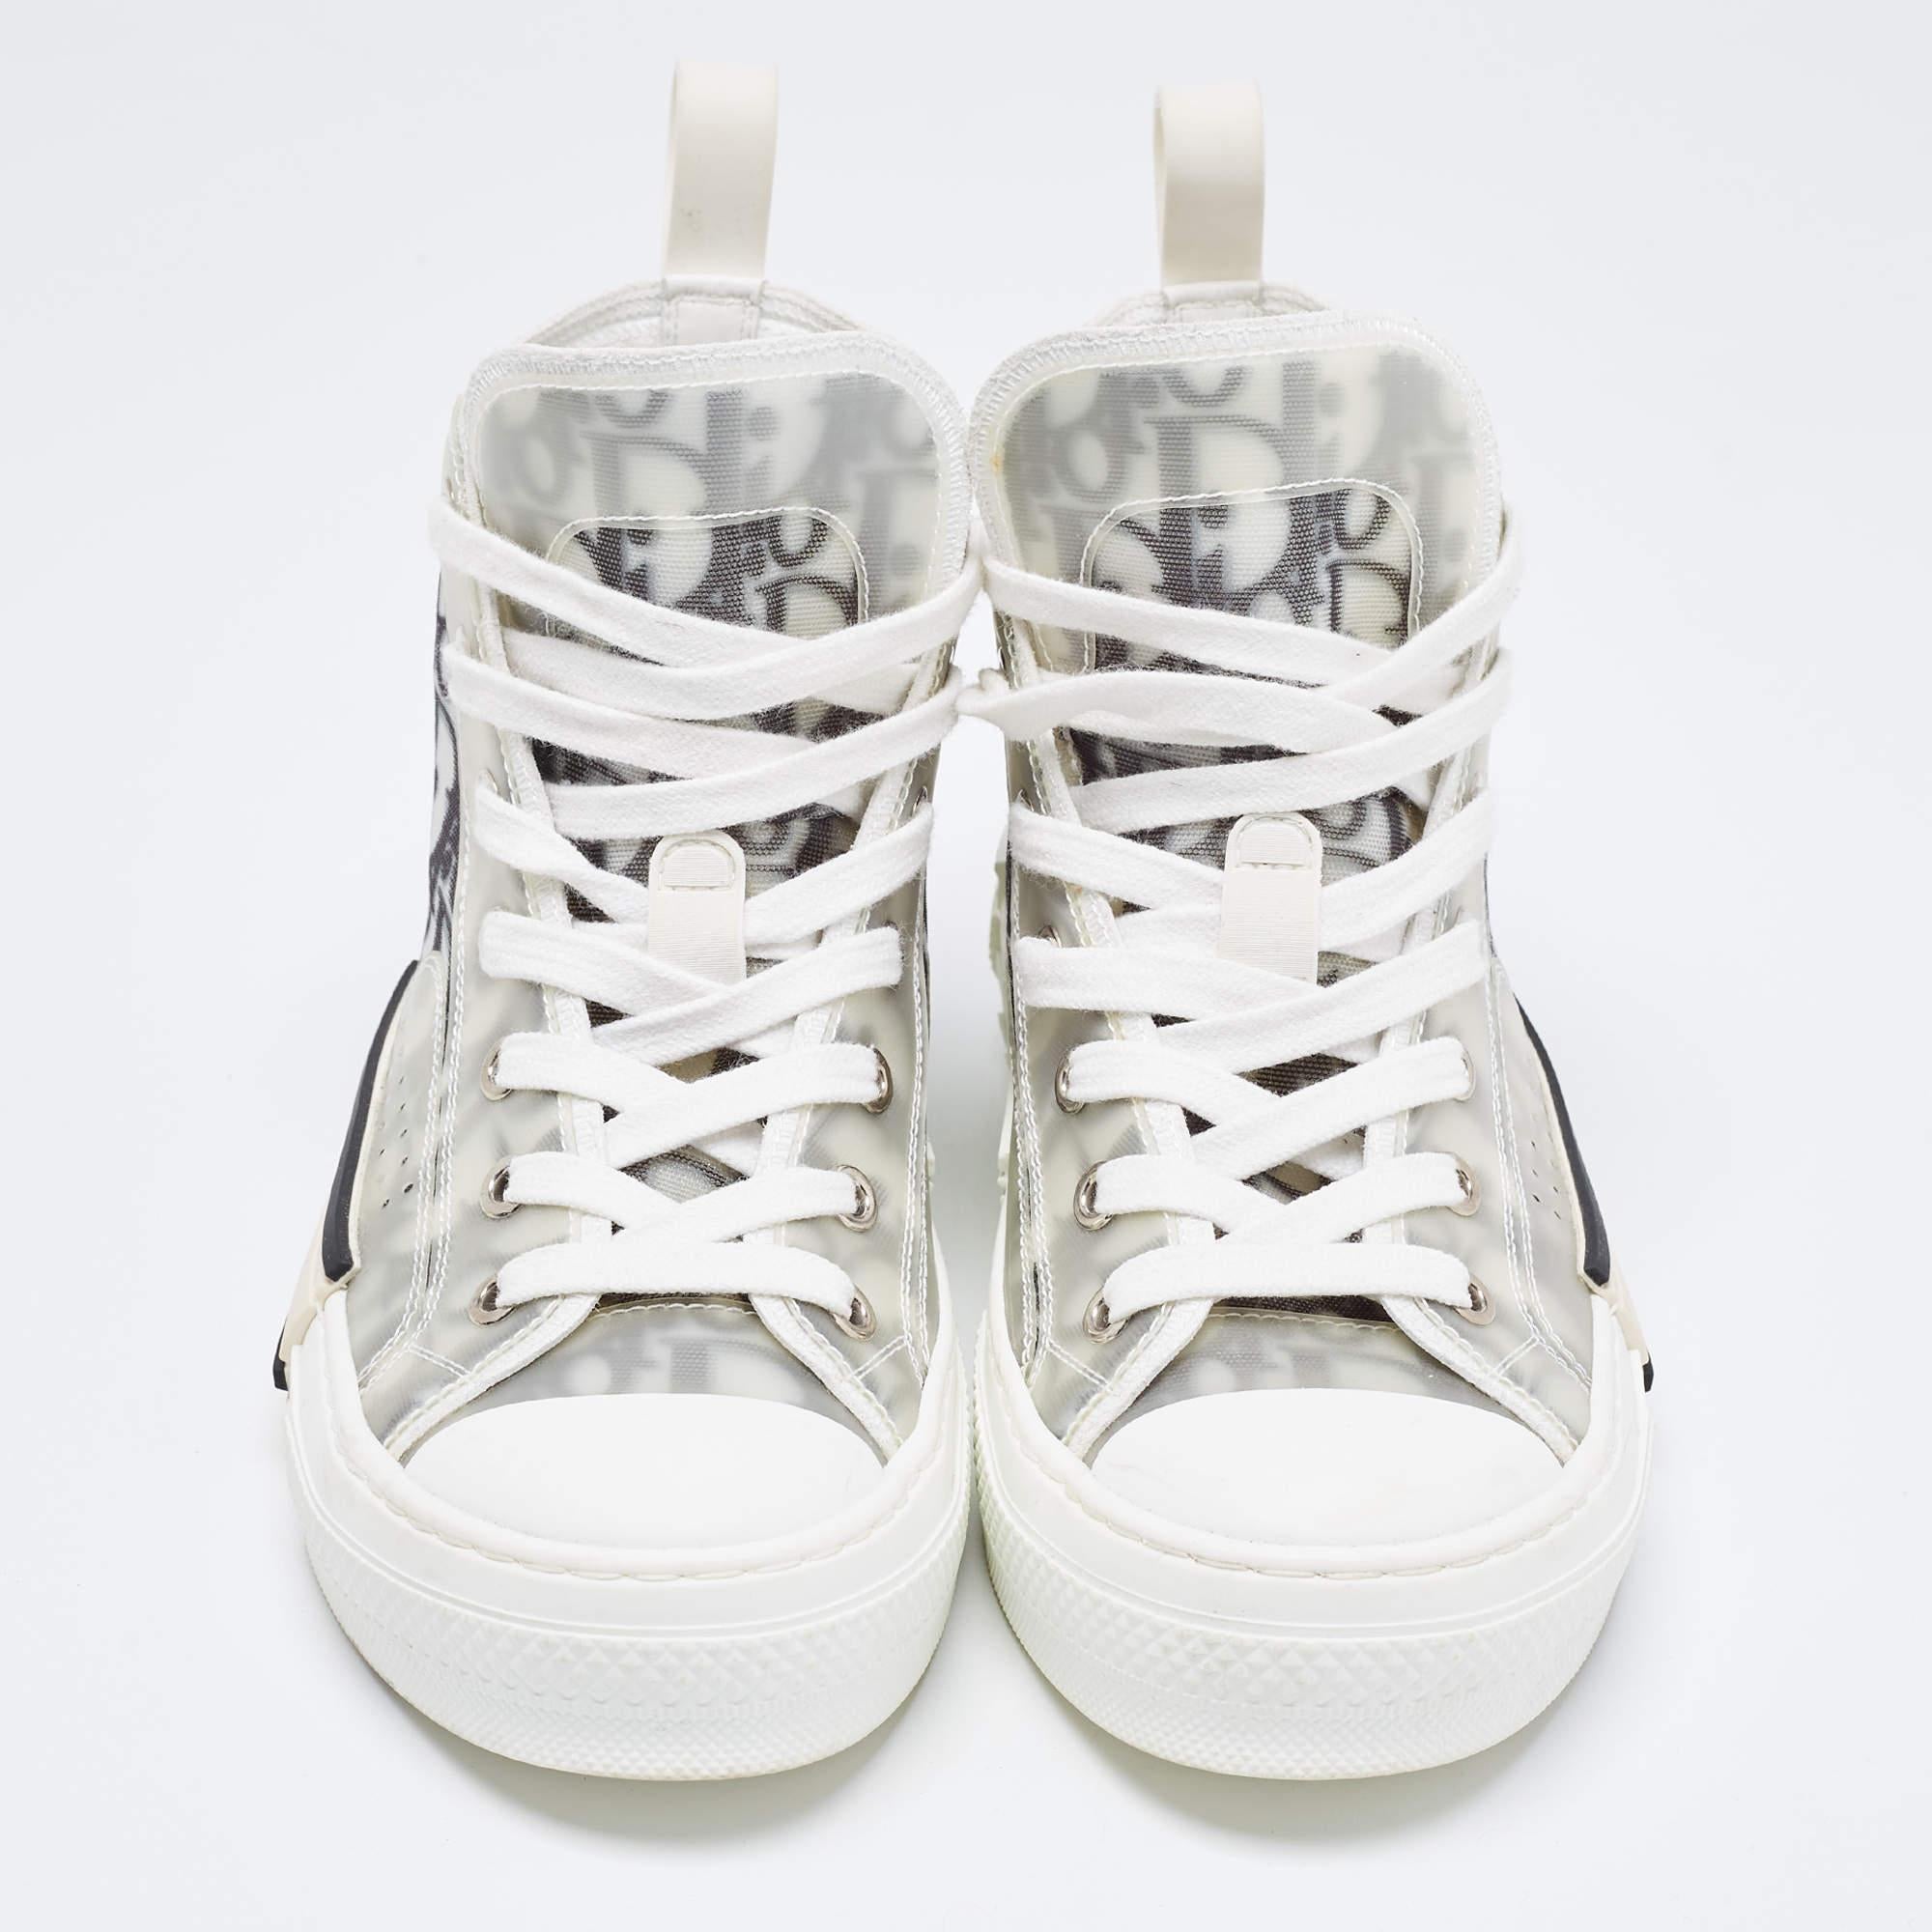 Add a statement appeal to your outfit with these Dior sneakers. Made from premium materials, they feature lace-up vamps, and relaxing footbeds. The rubber sole of this pair aims to provide you with everyday ease.

